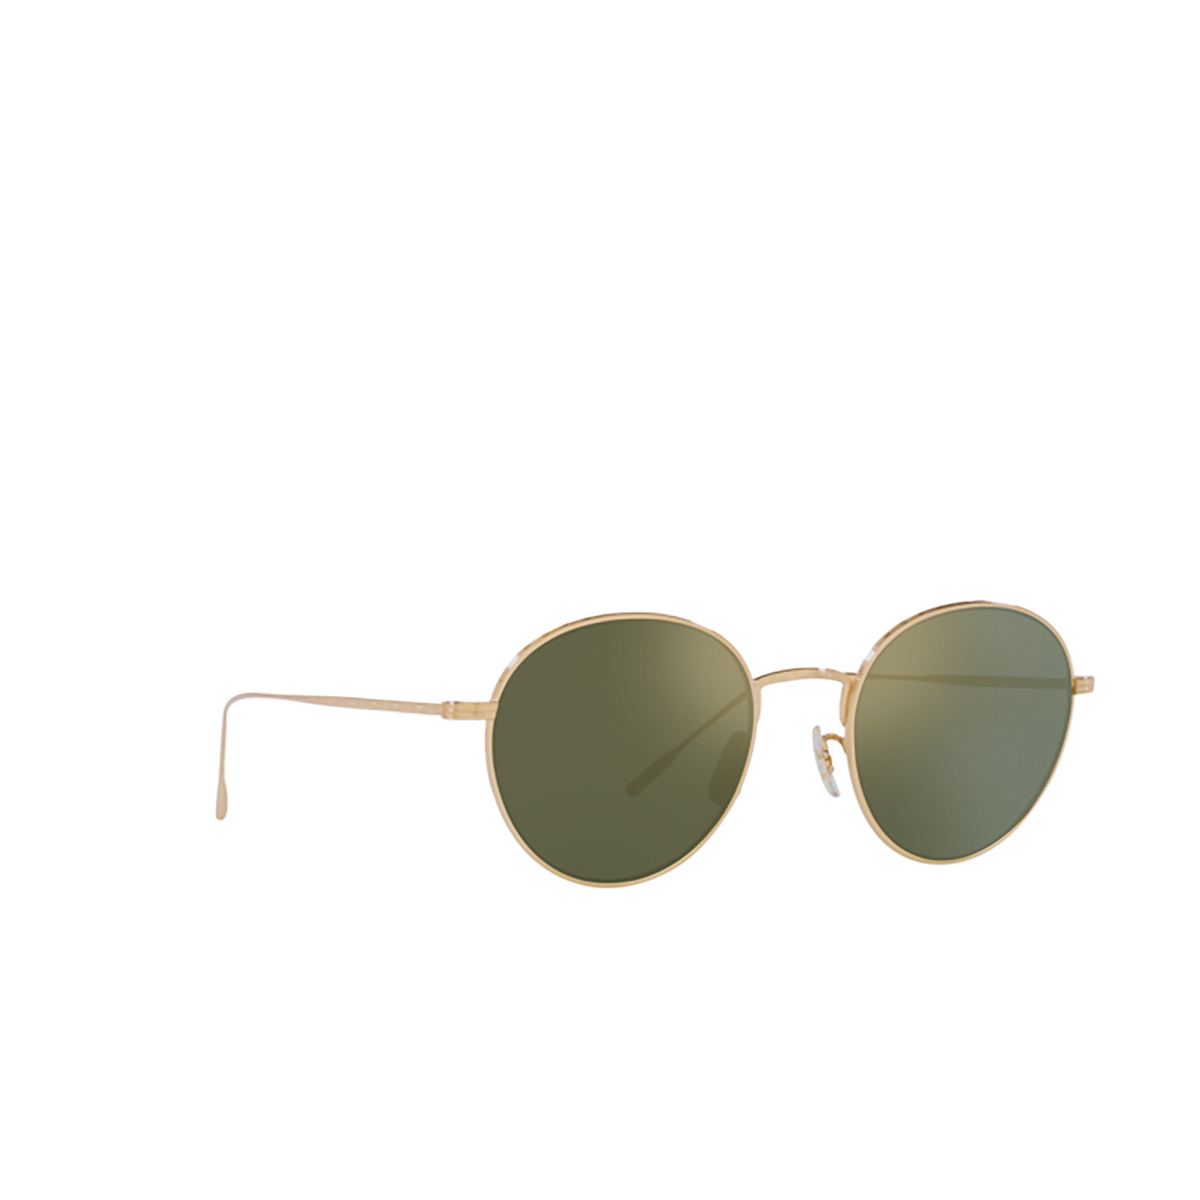 Oliver Peoples ALTAIR Sunglasses 5292O8 Gold - three-quarters view